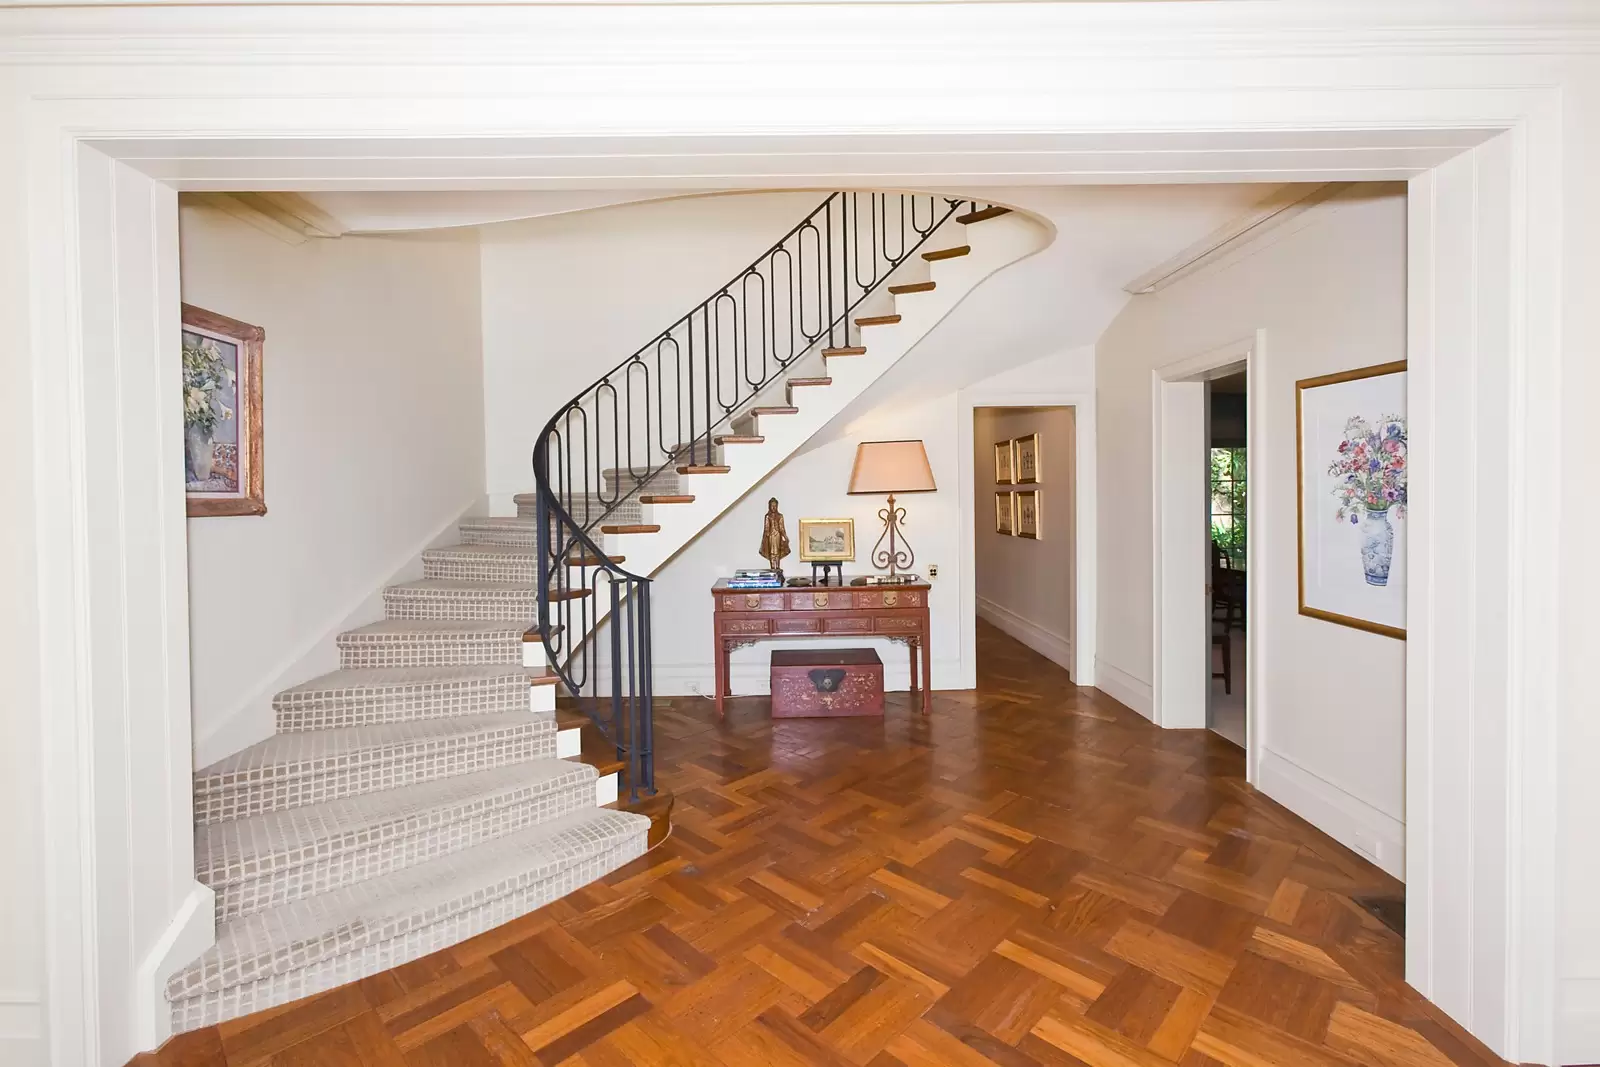 Photo #6: 2 Carrington Avenue, Bellevue Hill - Sold by Sydney Sotheby's International Realty